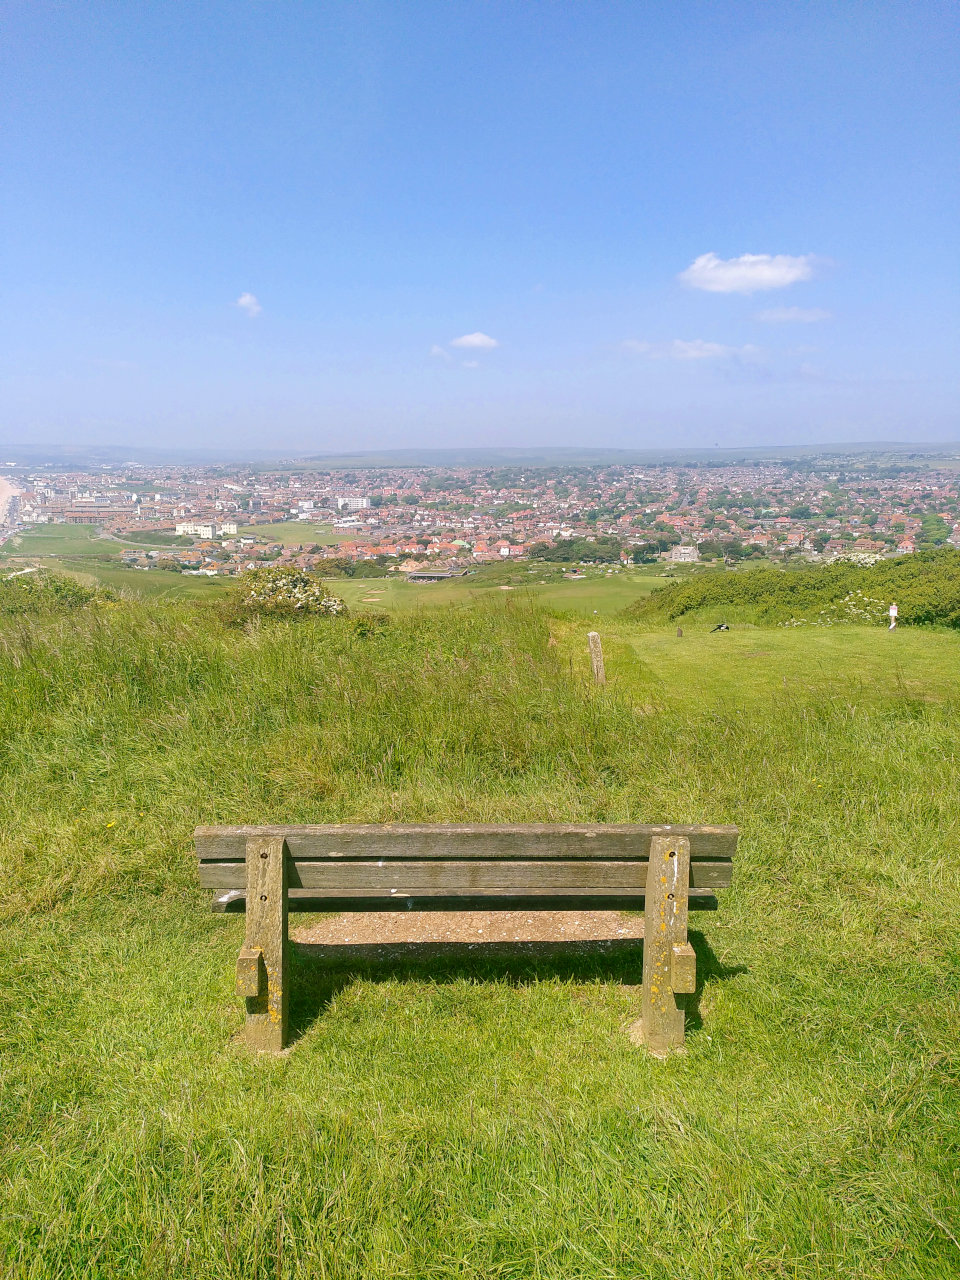 Photo of a bench on top of a grassy hill, overlooking a small town in the distance, under blue sky with a couple of fluffy clouds.